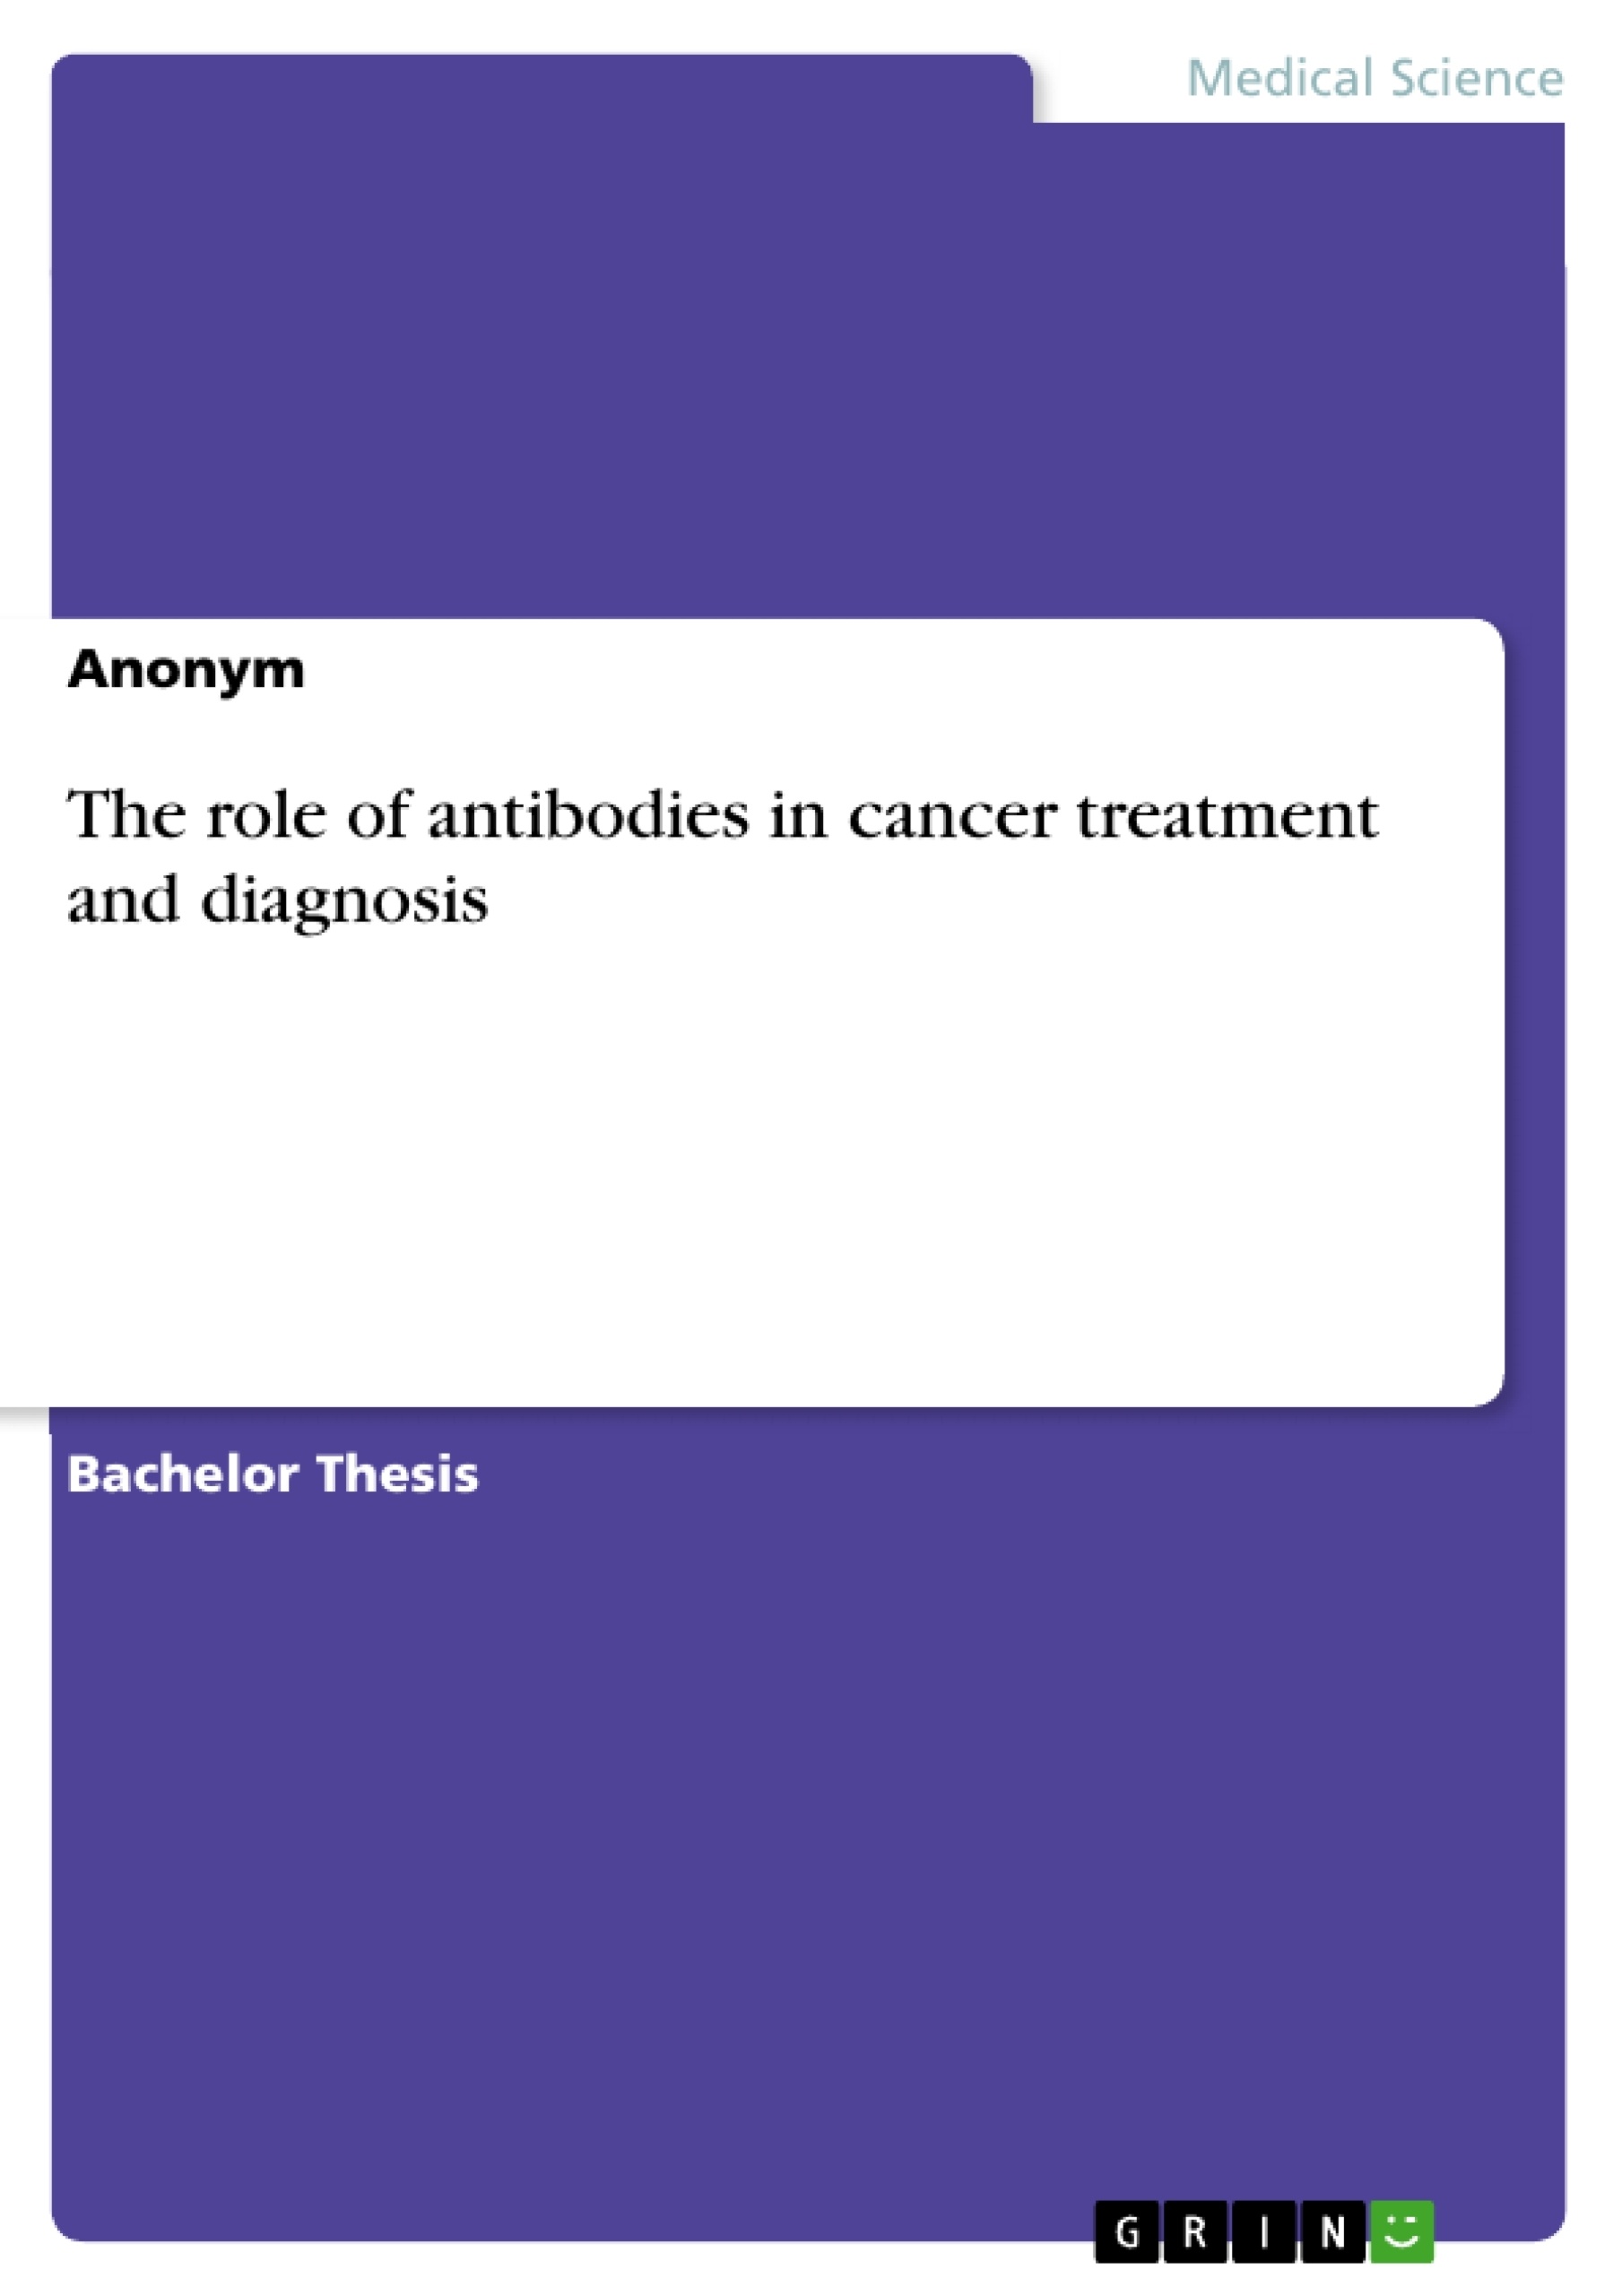 Title: The role of antibodies in cancer treatment and diagnosis